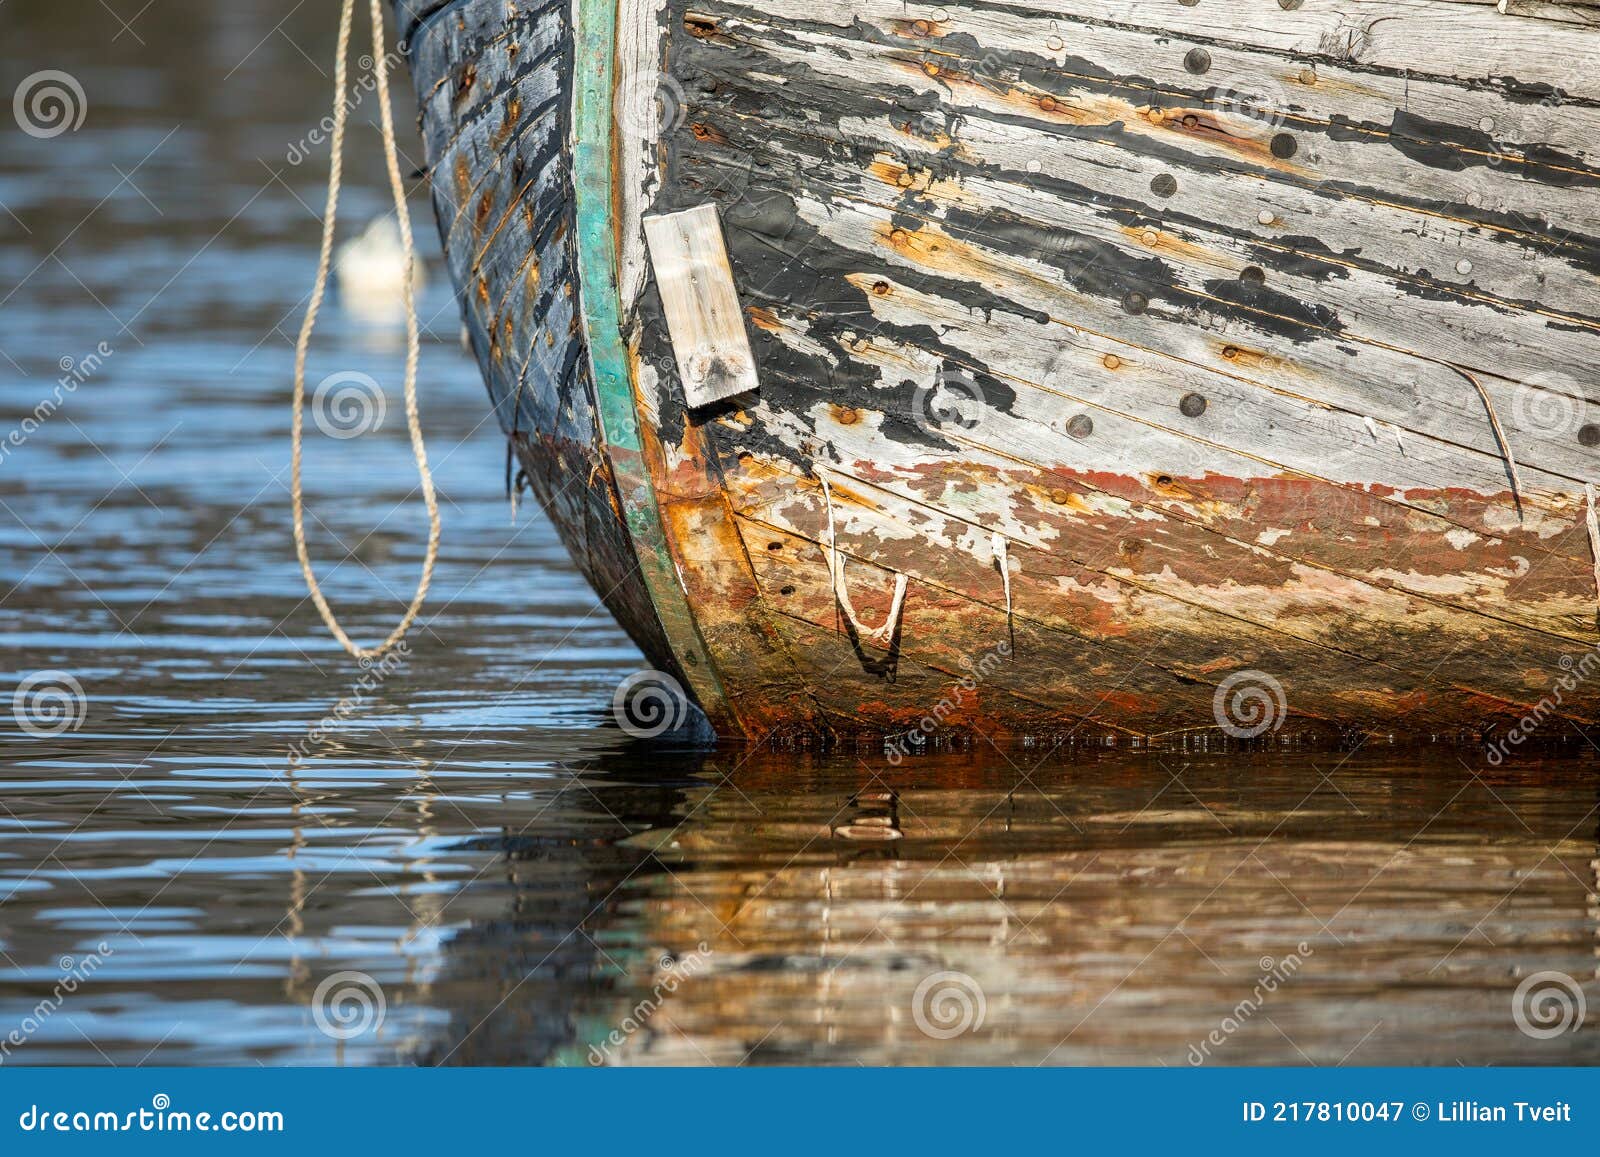 https://thumbs.dreamstime.com/z/old-wooden-fishing-boat-water-needs-painting-paint-gone-texture-visible-might-sink-calm-sea-rope-hanging-217810047.jpg